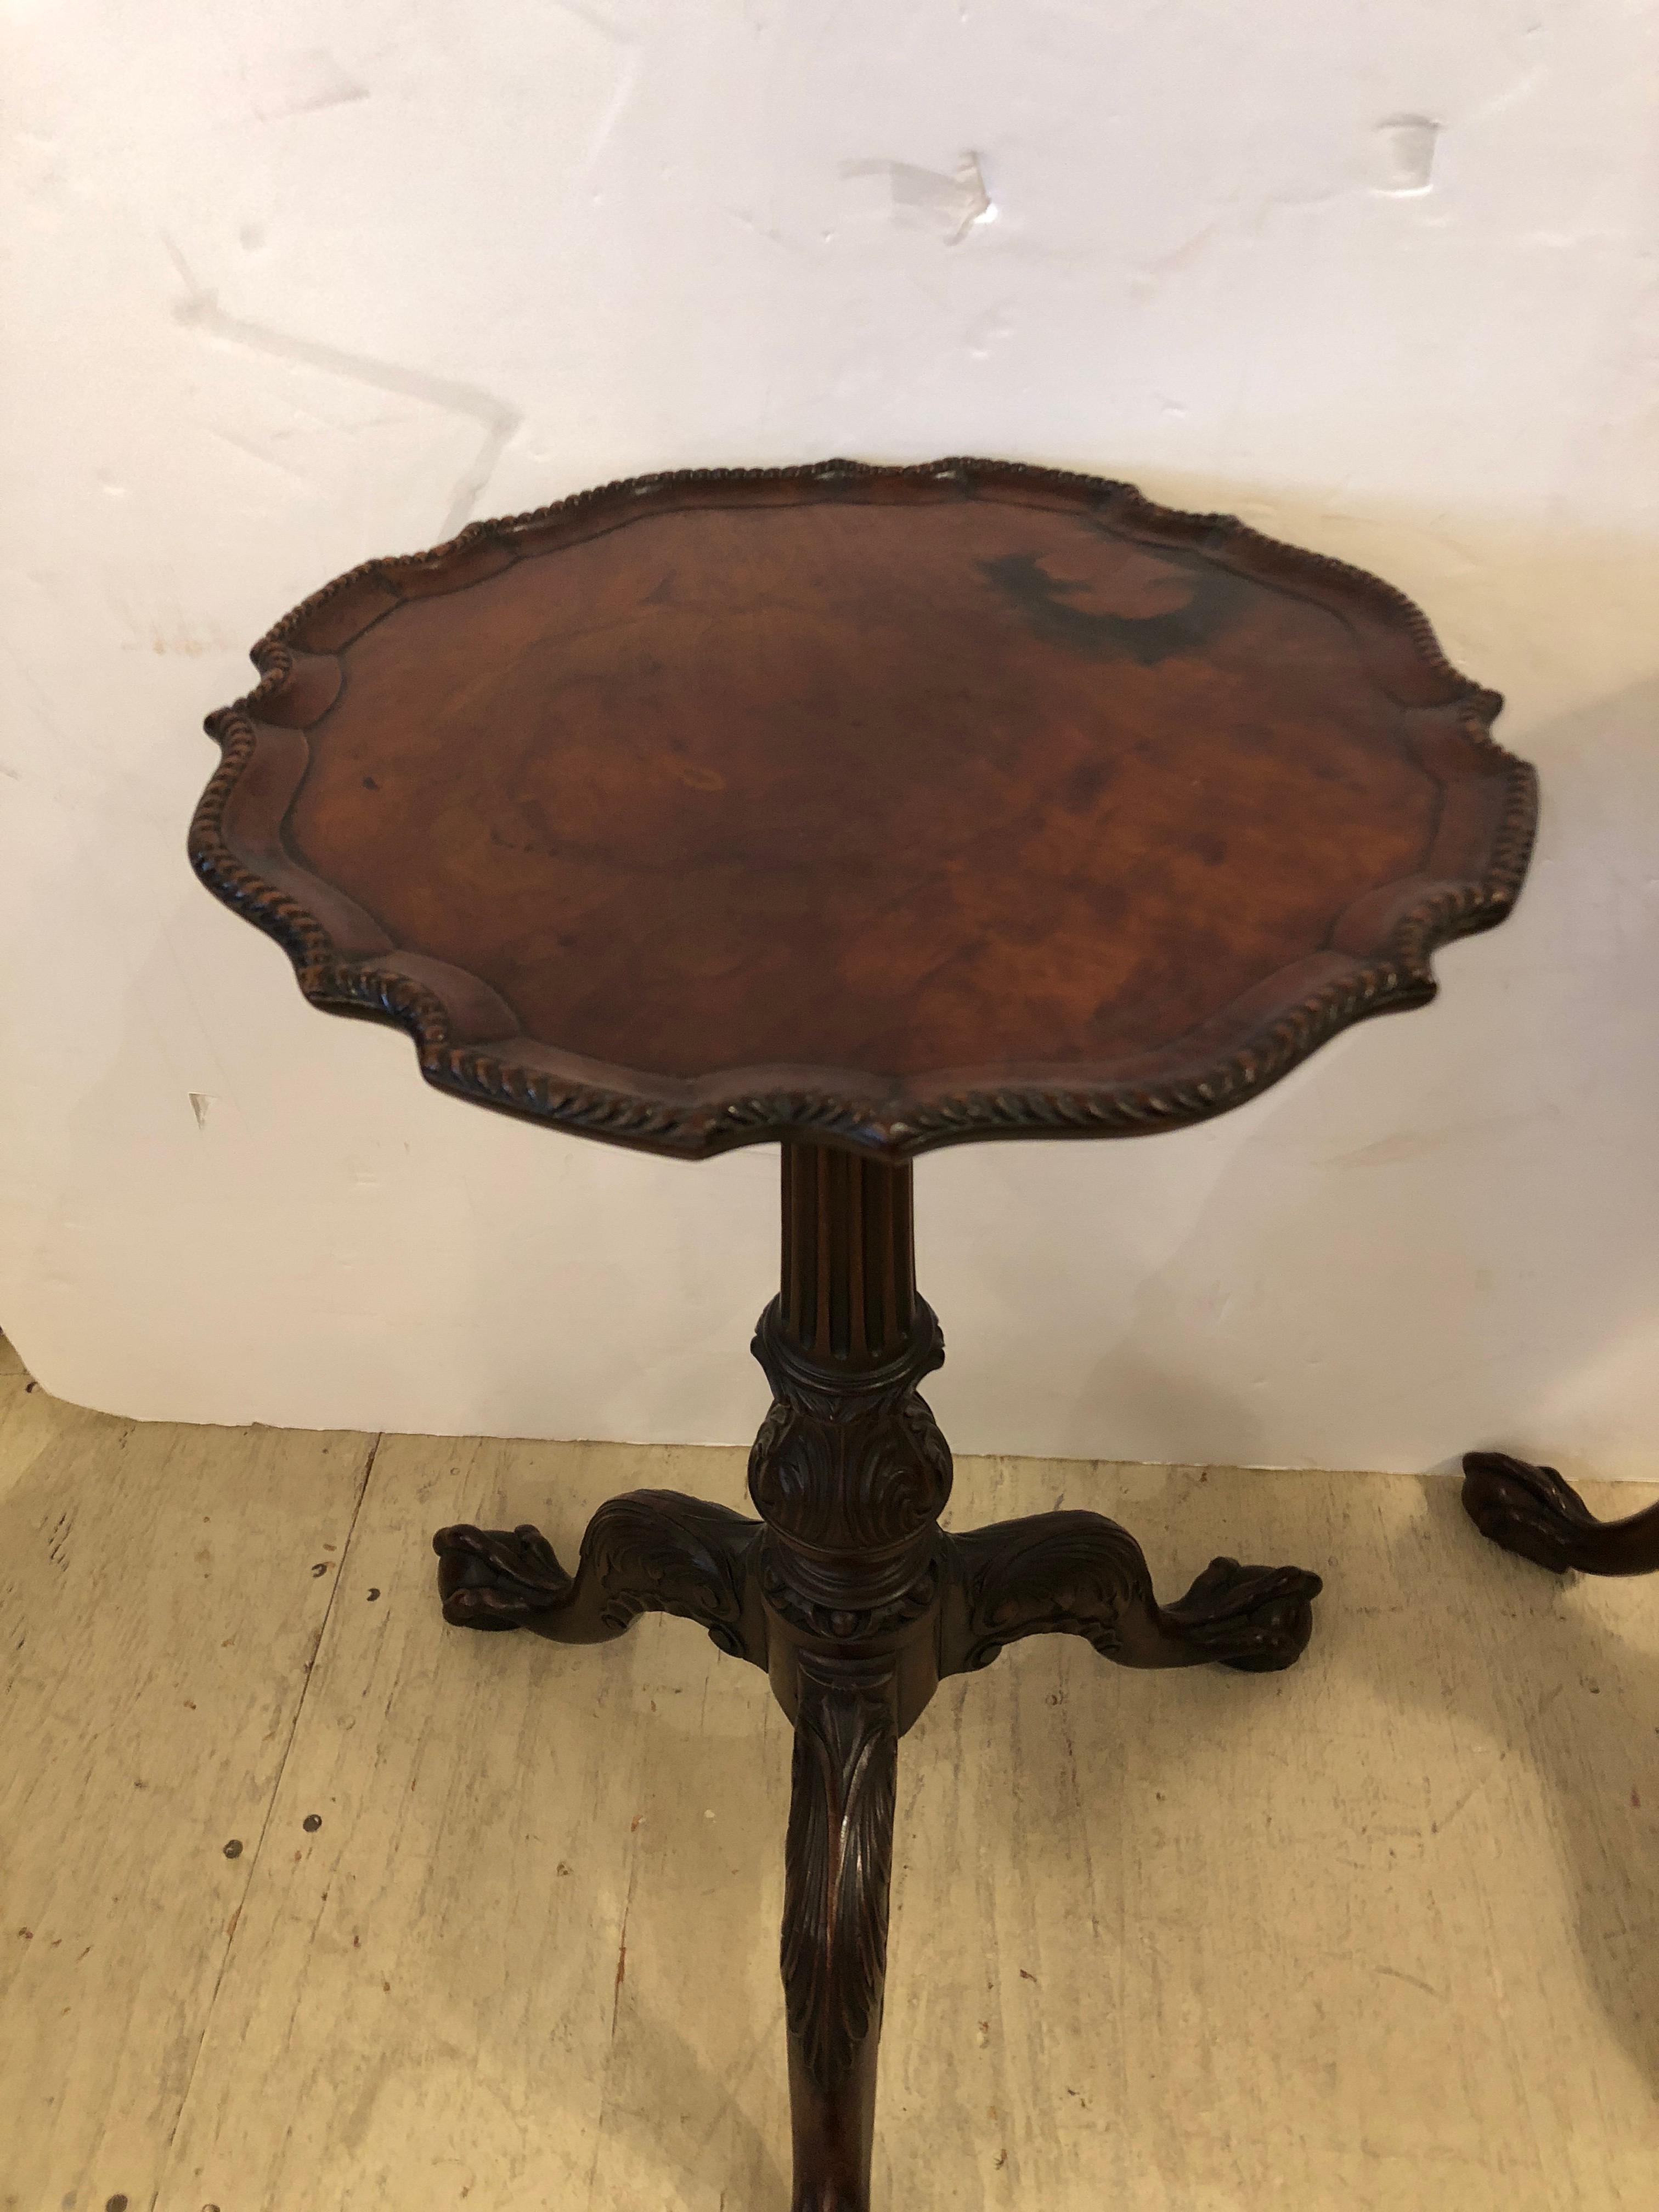 Lovely pair of elegant 19th century round small side or end tables, with slight variations with one table having a gadrooned edge, the other scalloped. Slightly different dimensions are also listed below. There are beautiful details such as ball and